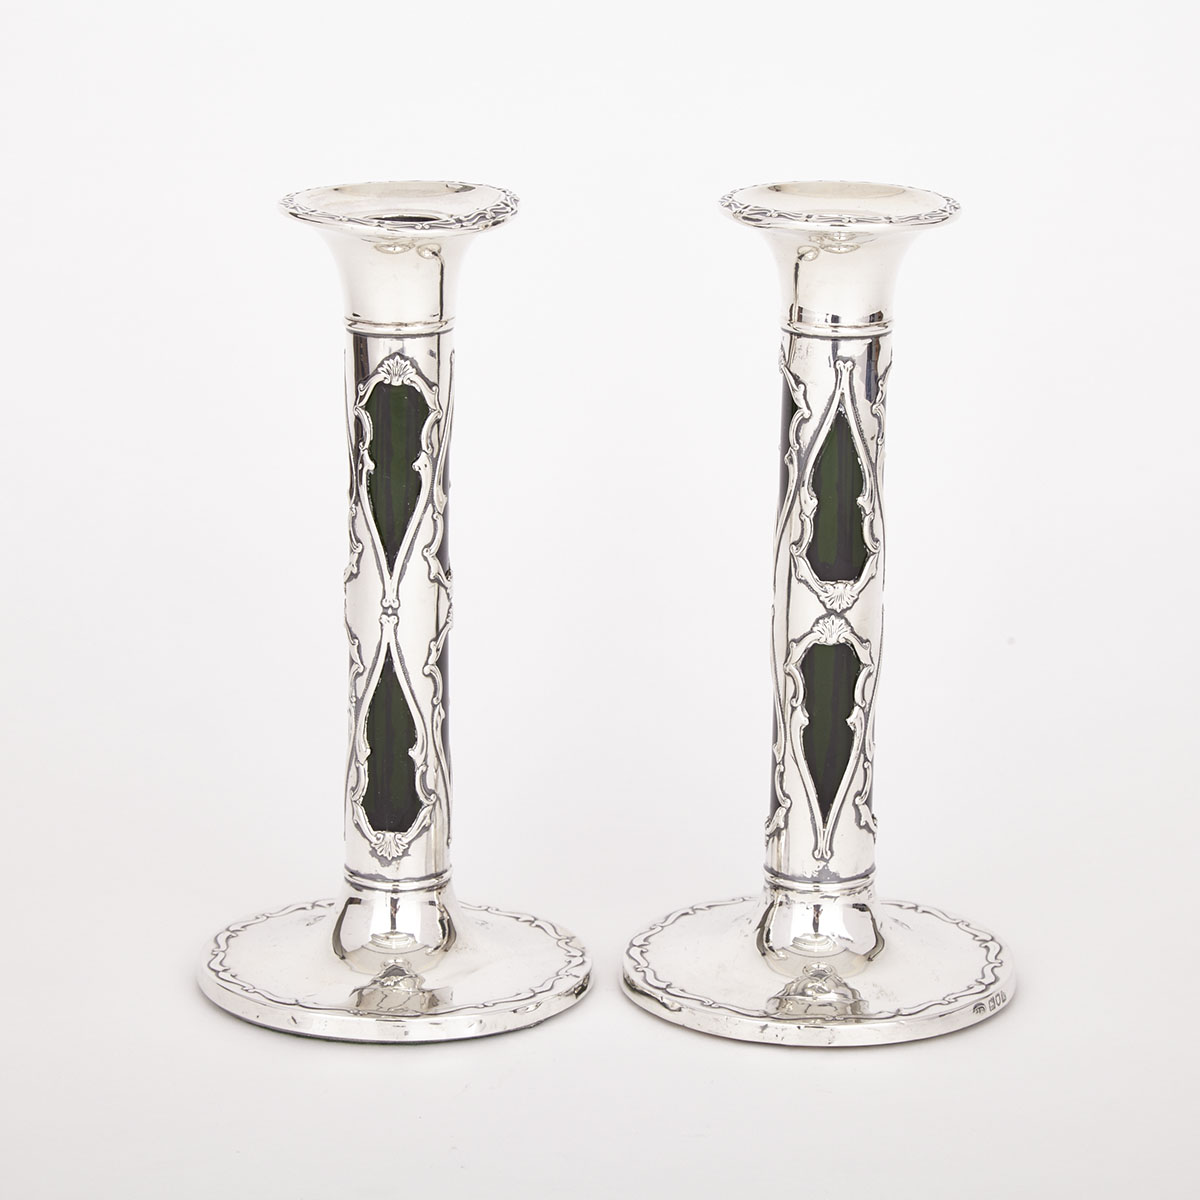 Pair of Edwardian Silver and Green Glass Table Candlesticks, John Round & Son, London, 1905